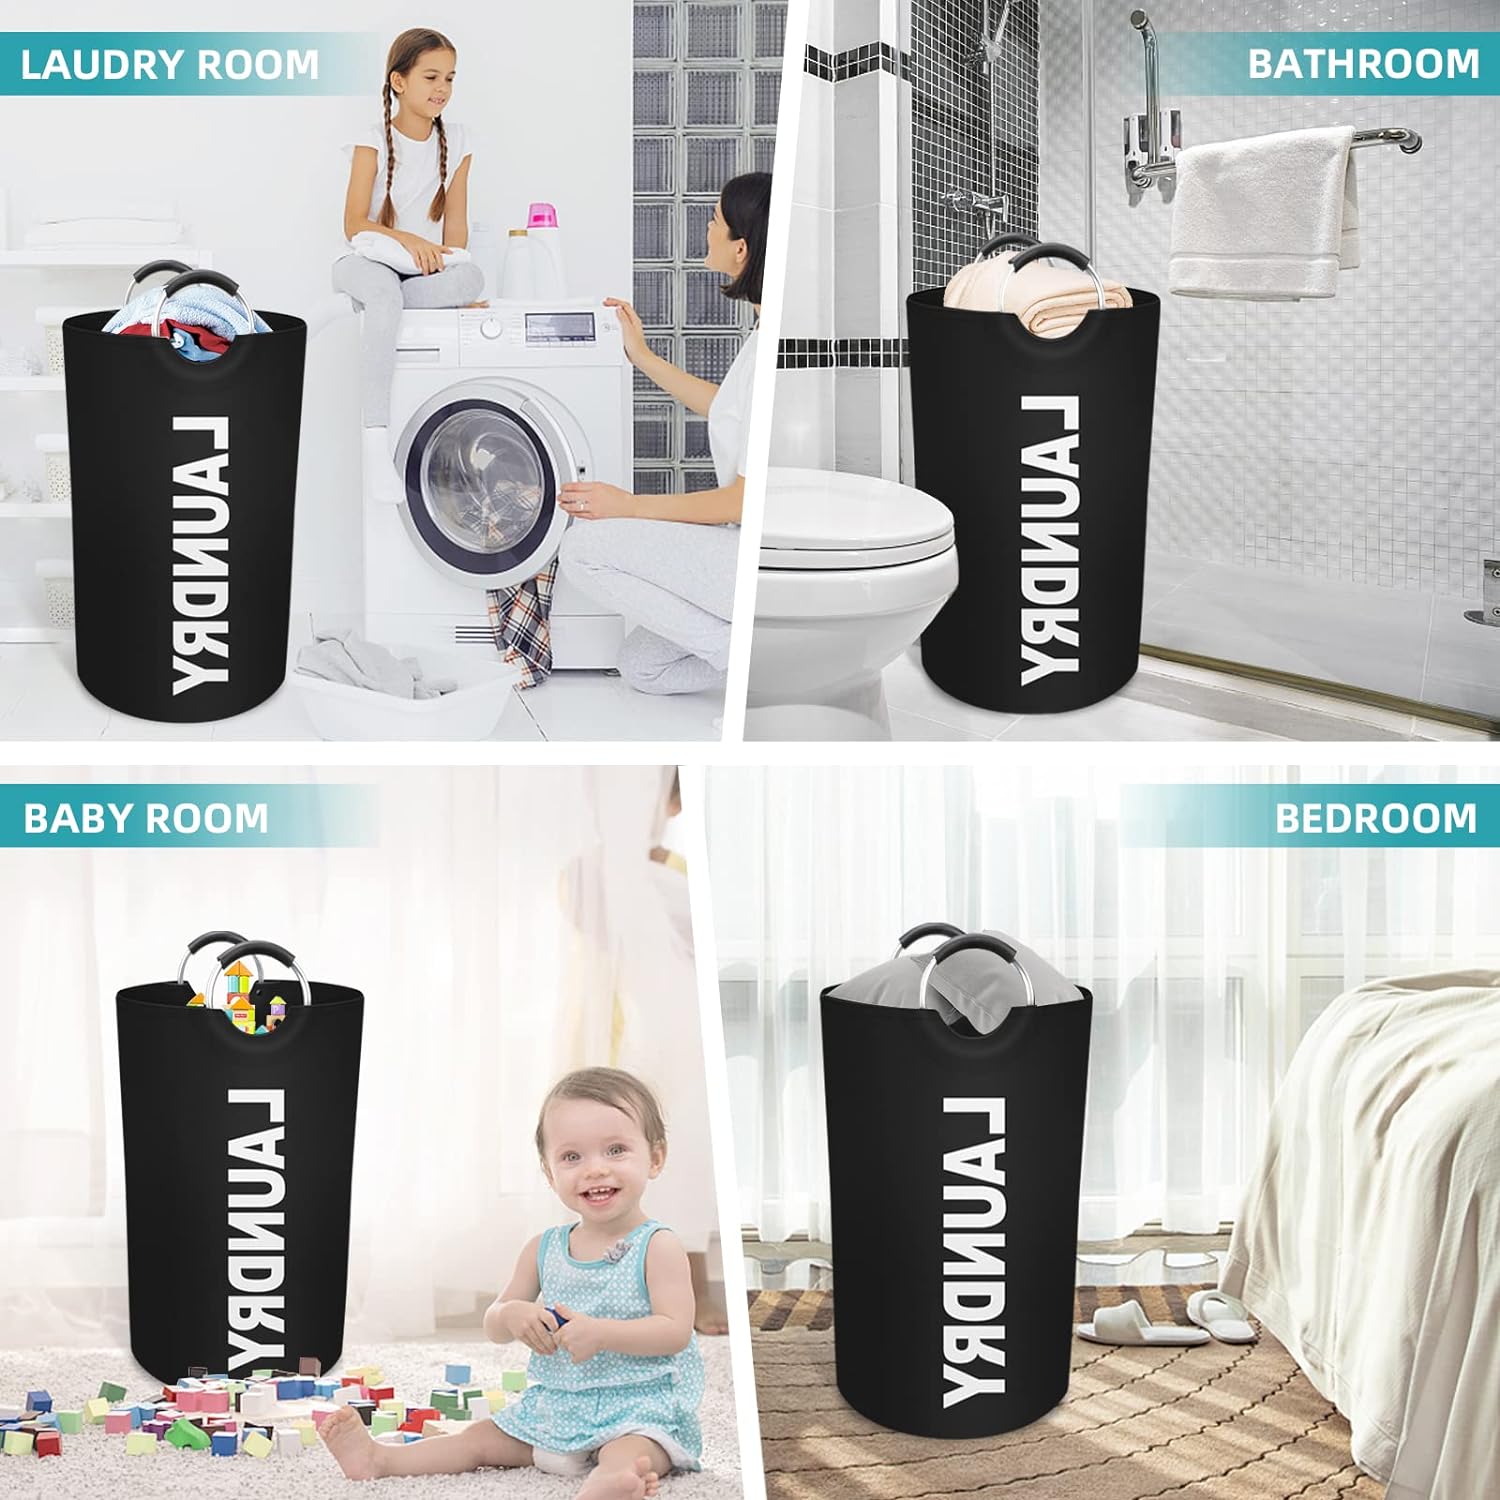 Love the laundry hamper. It takes up very little room and the handles are a big plus which means it' easy to transport to the laundry room. It works much better than a standard basket. Recommend product.